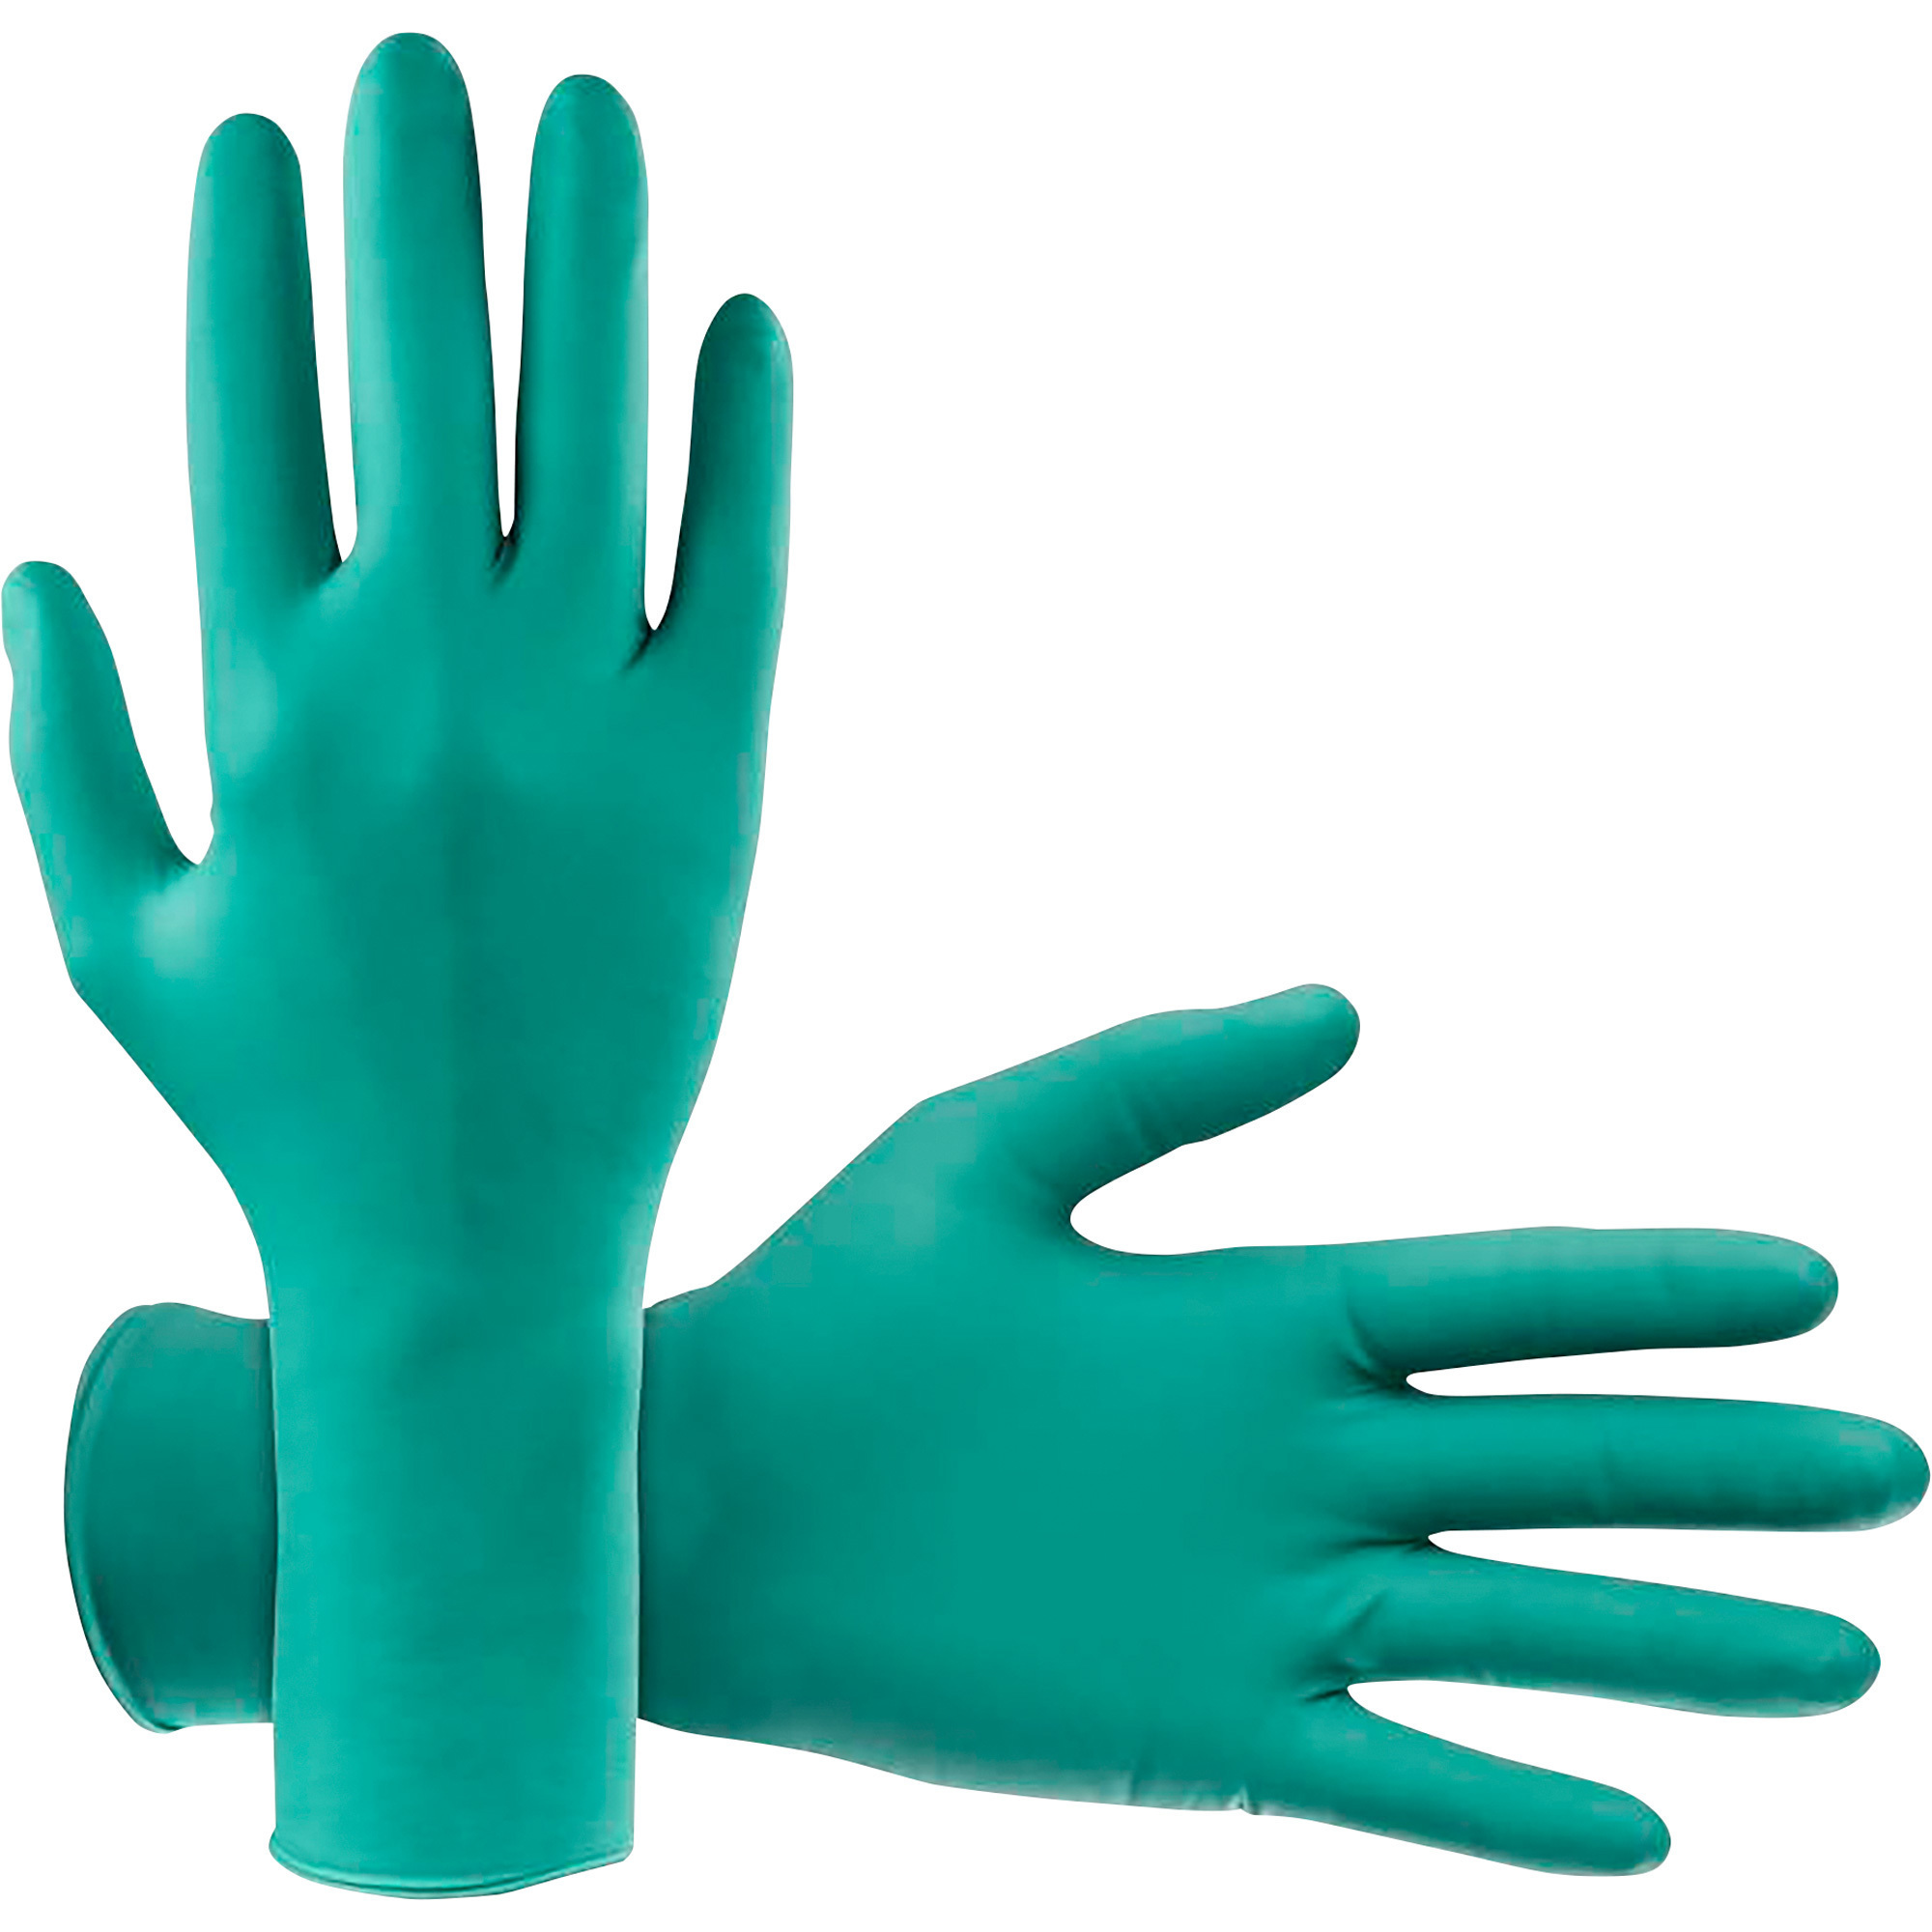 Chem Defender Premium Chemical-Resistant Disposable Safety Gloves with Extended Cuff, 50-Pack, Green, XL, Model 66594